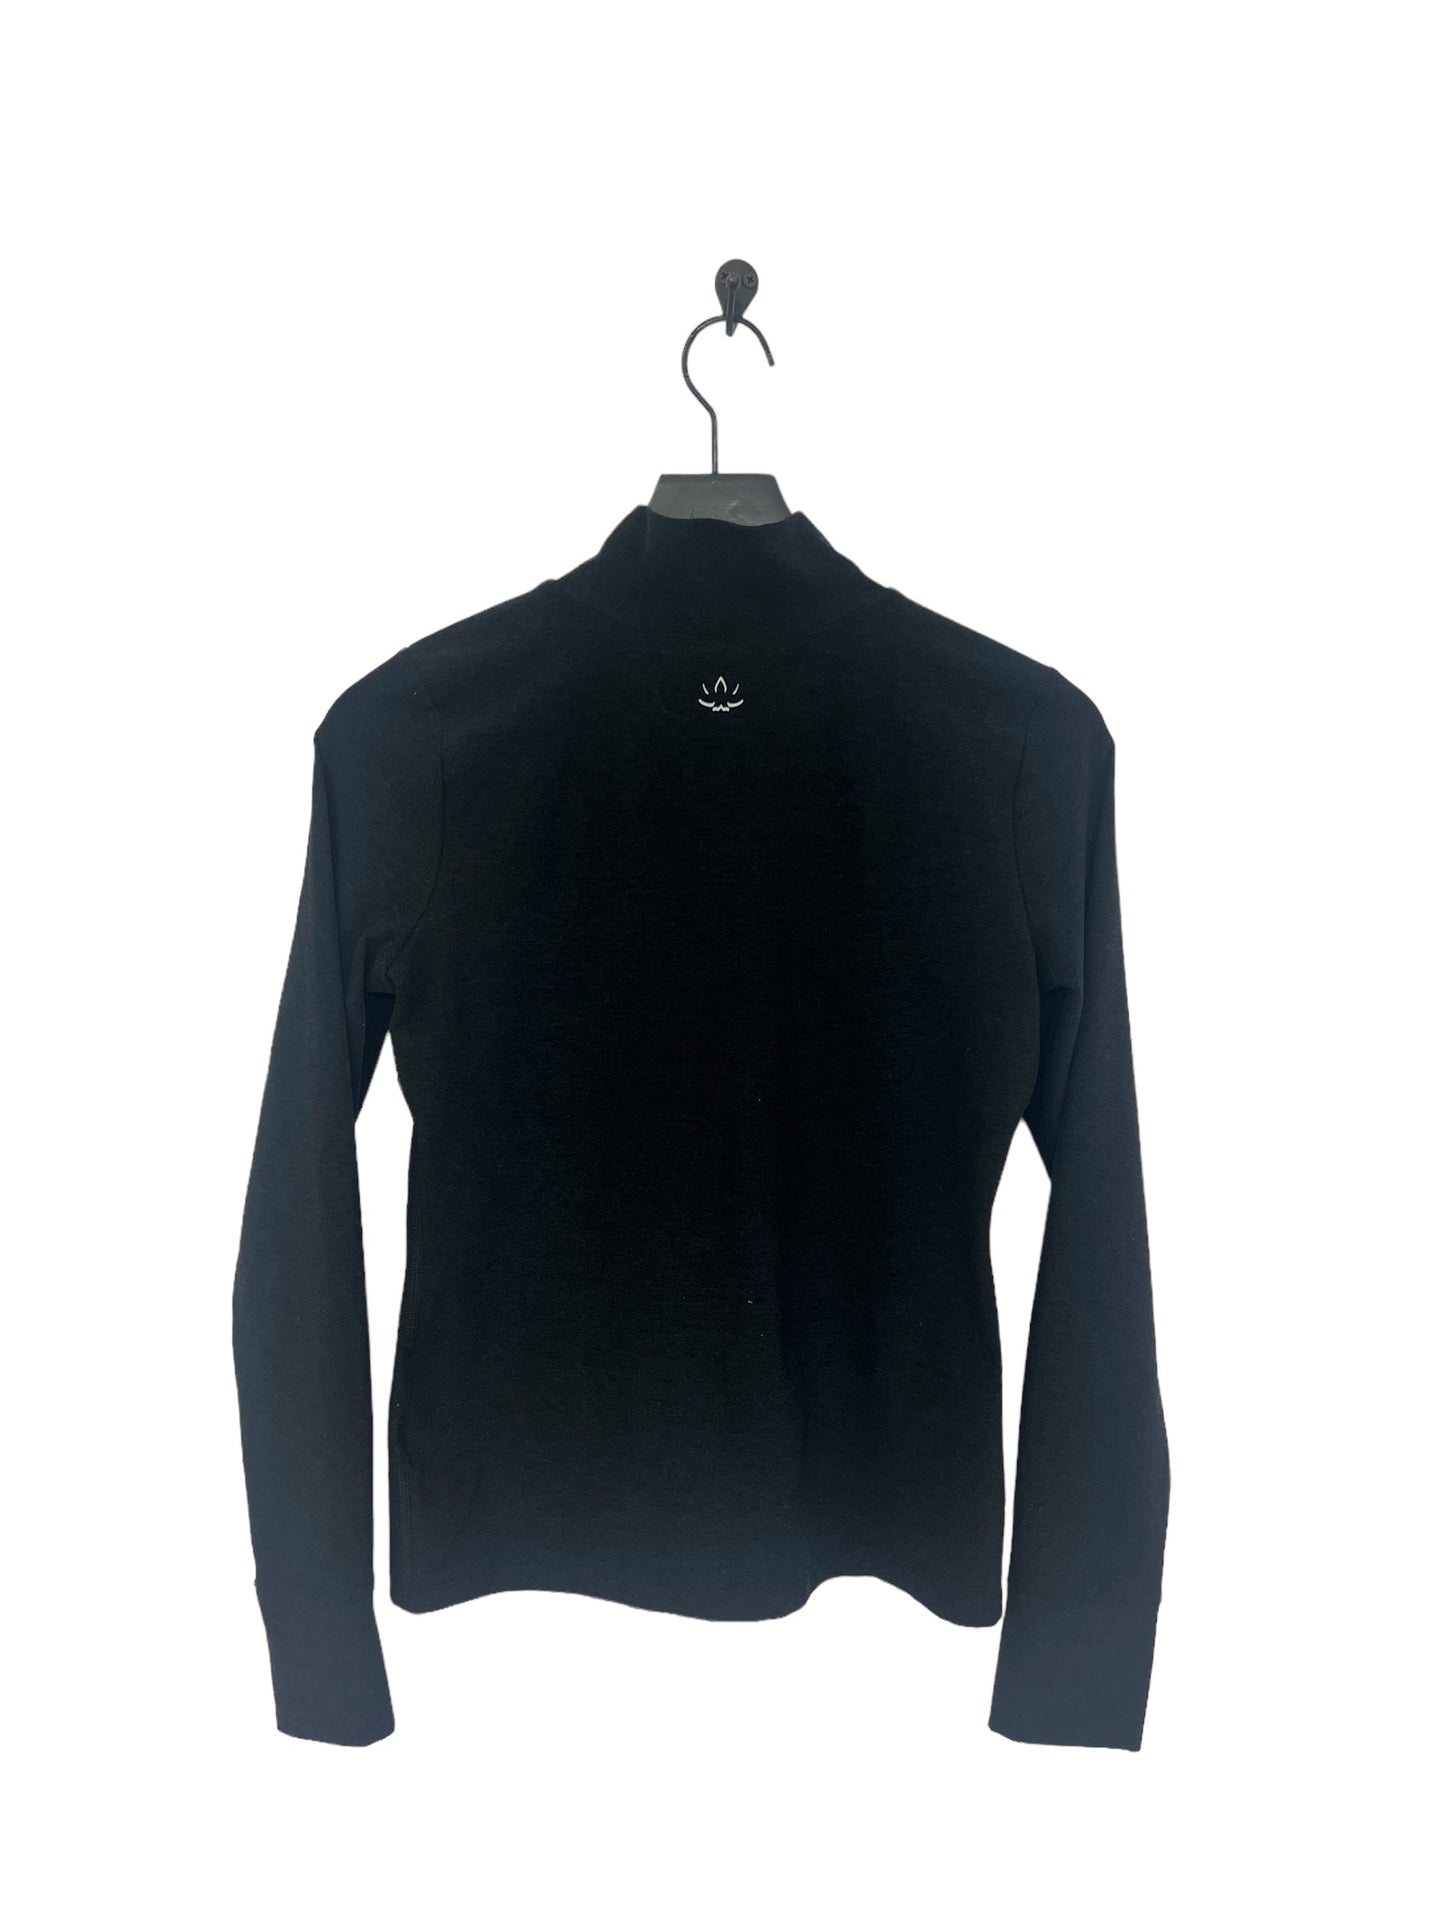 Athletic Top Long Sleeve Collar By Beyond Yoga  Size: M